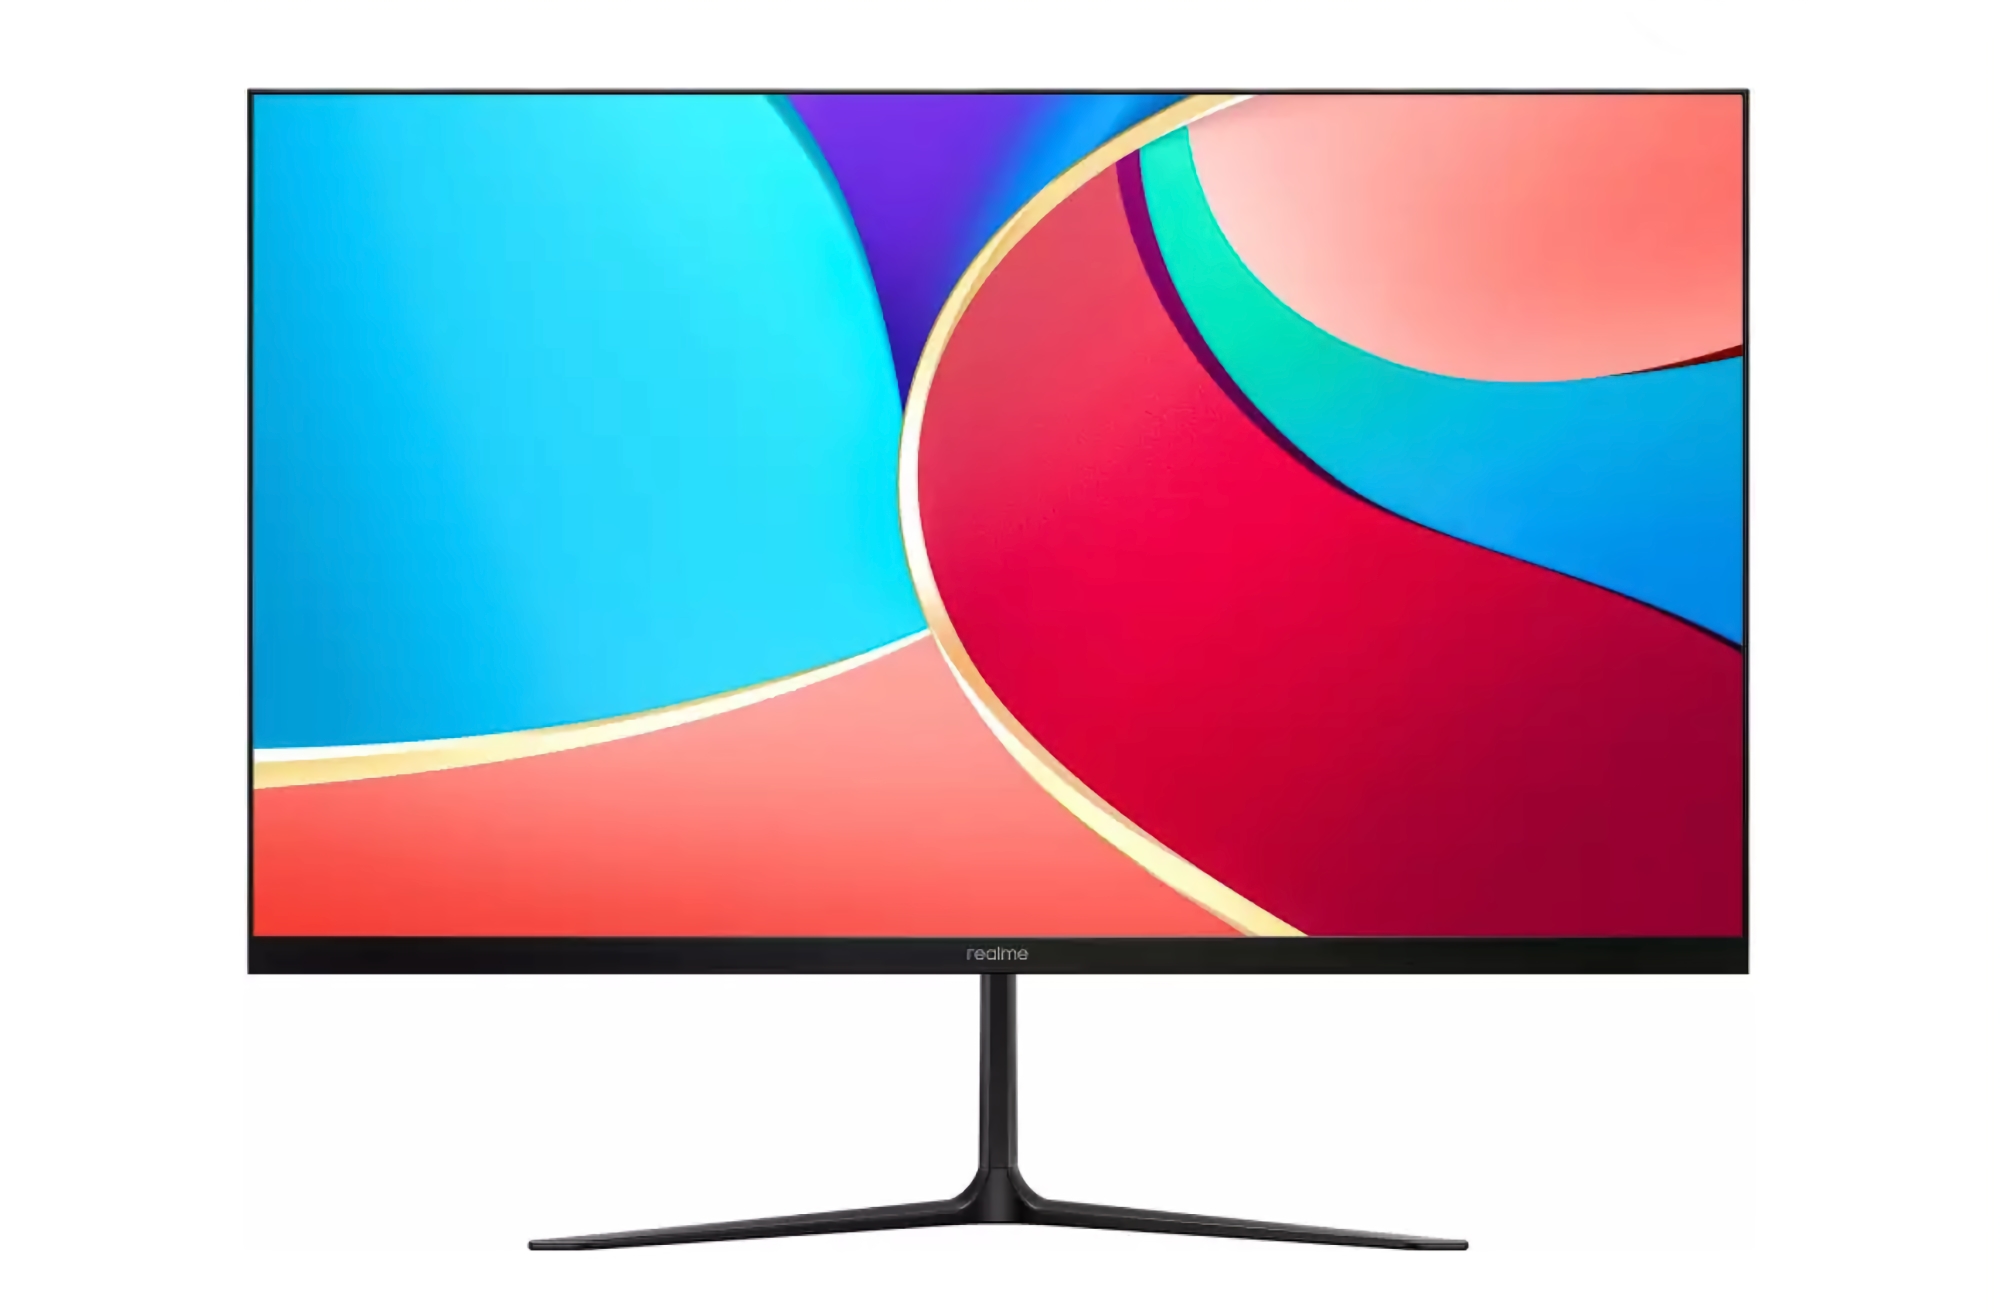 realme Flat Monitor Full HD: 23.8″ display, 75Hz refresh rate, slim frame for $238